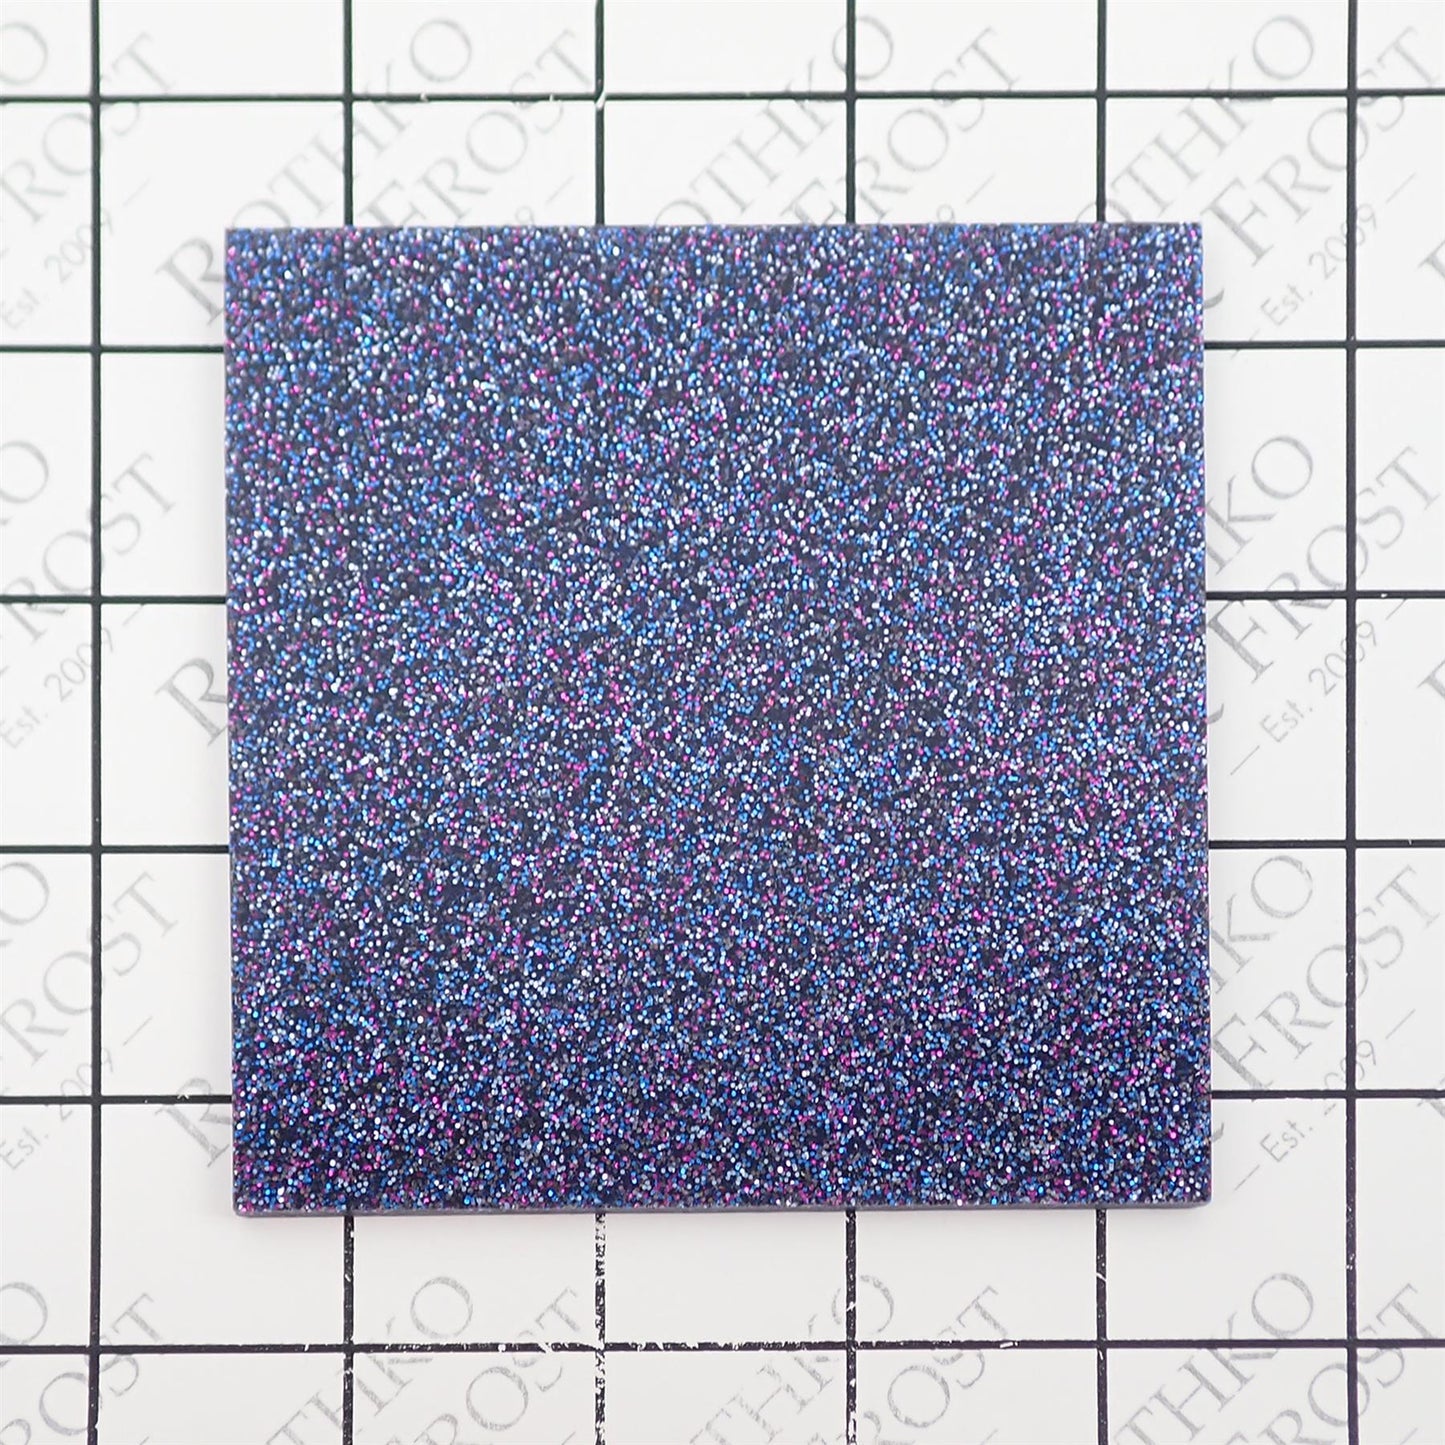 Incudo Blue 2-Sided Holographic Glitter Acrylic Sheet - 98x98x3mm (3.9x3.86x0.12"), Sample